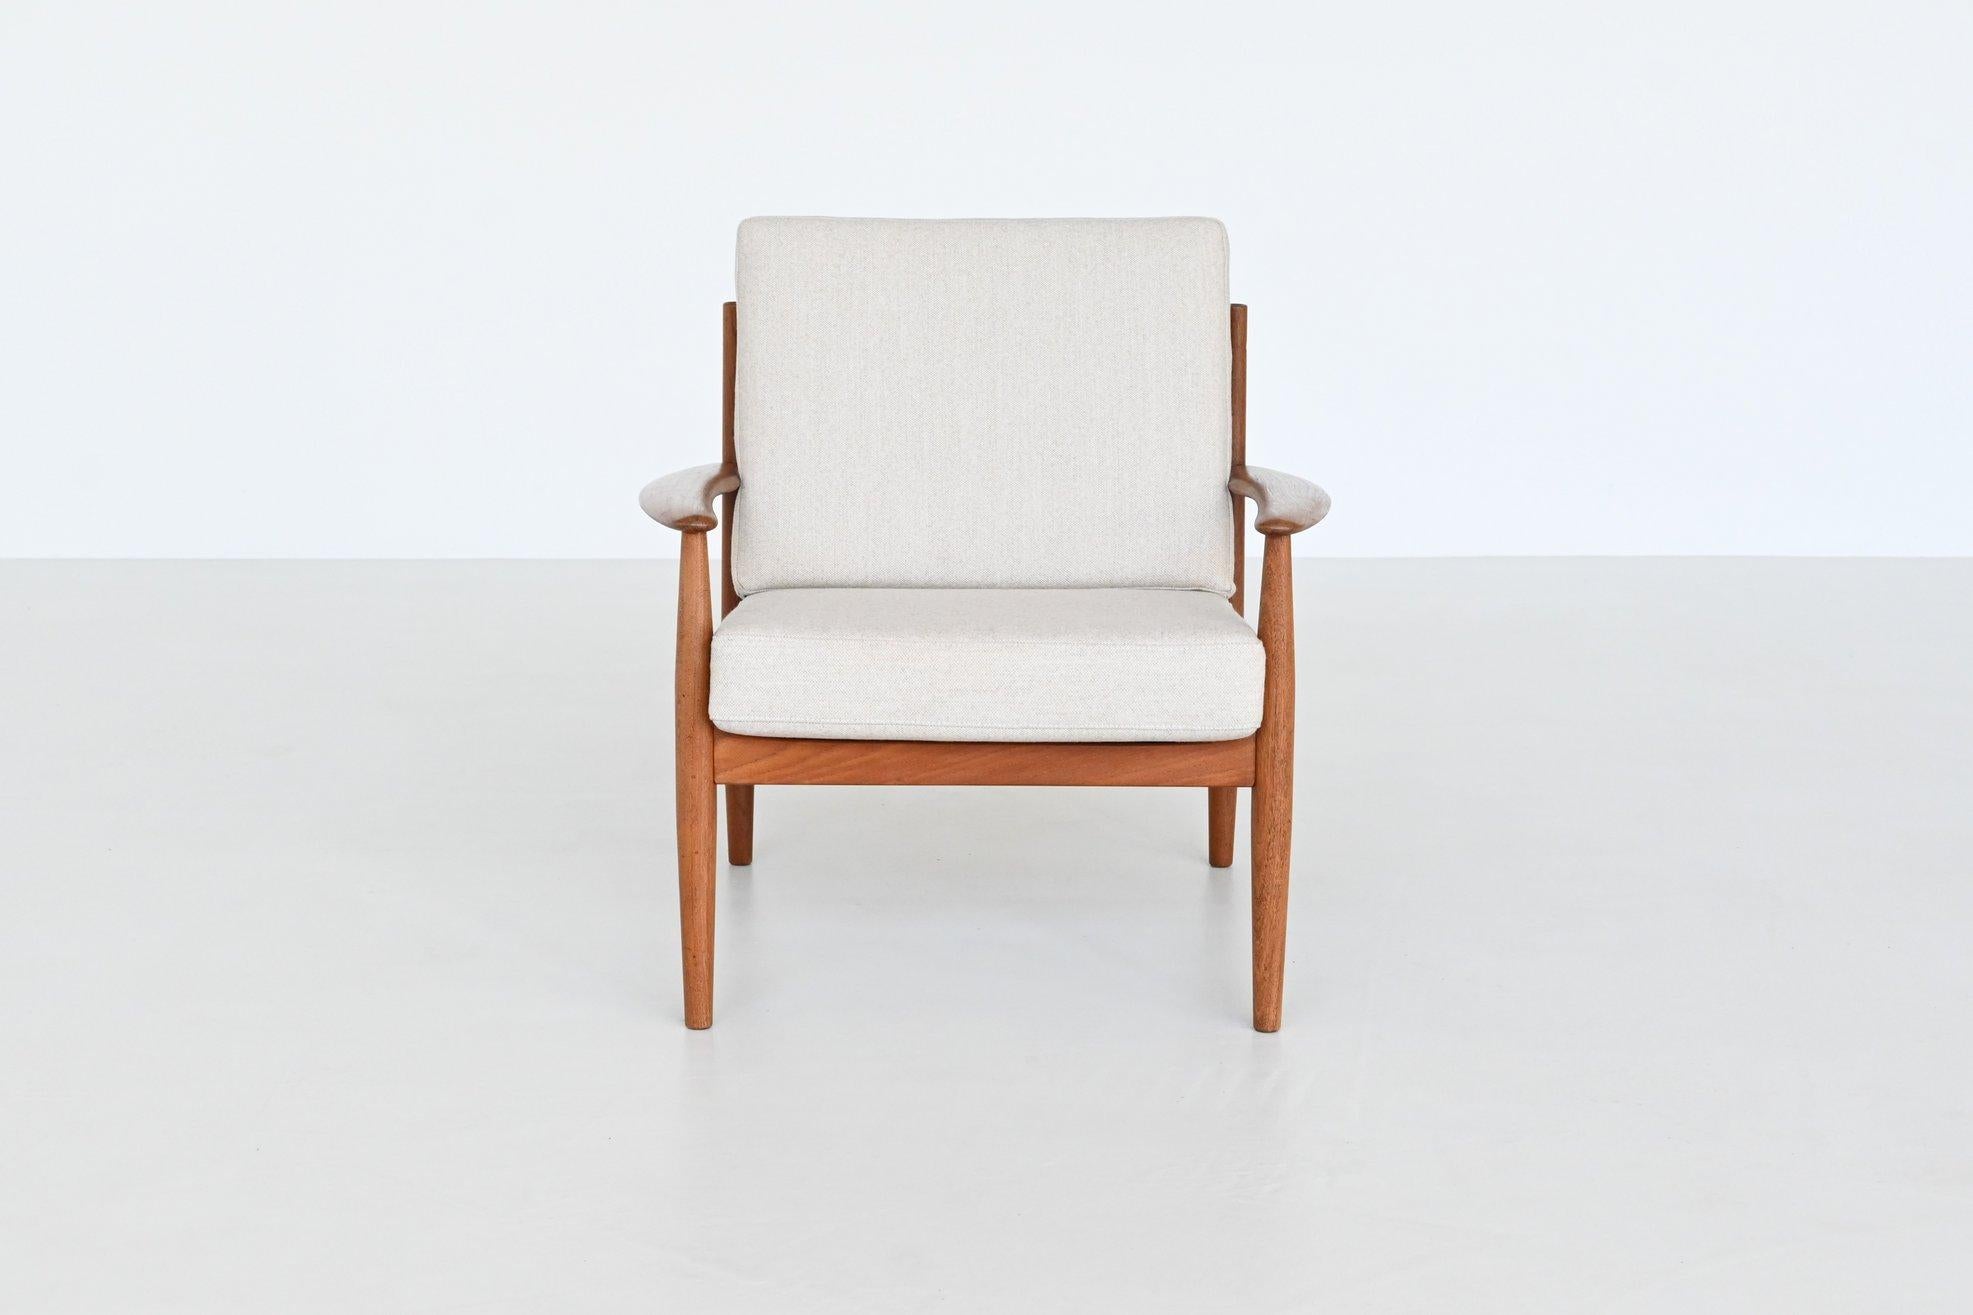 Stunning lounge chair model 128 designed by one of the few female mid-century furniture designers Grete Jalk for France & Søn, Denmark 1960. This elegant shaped lounge chair is handcrafted in solid teak wood and the new cushions are newly